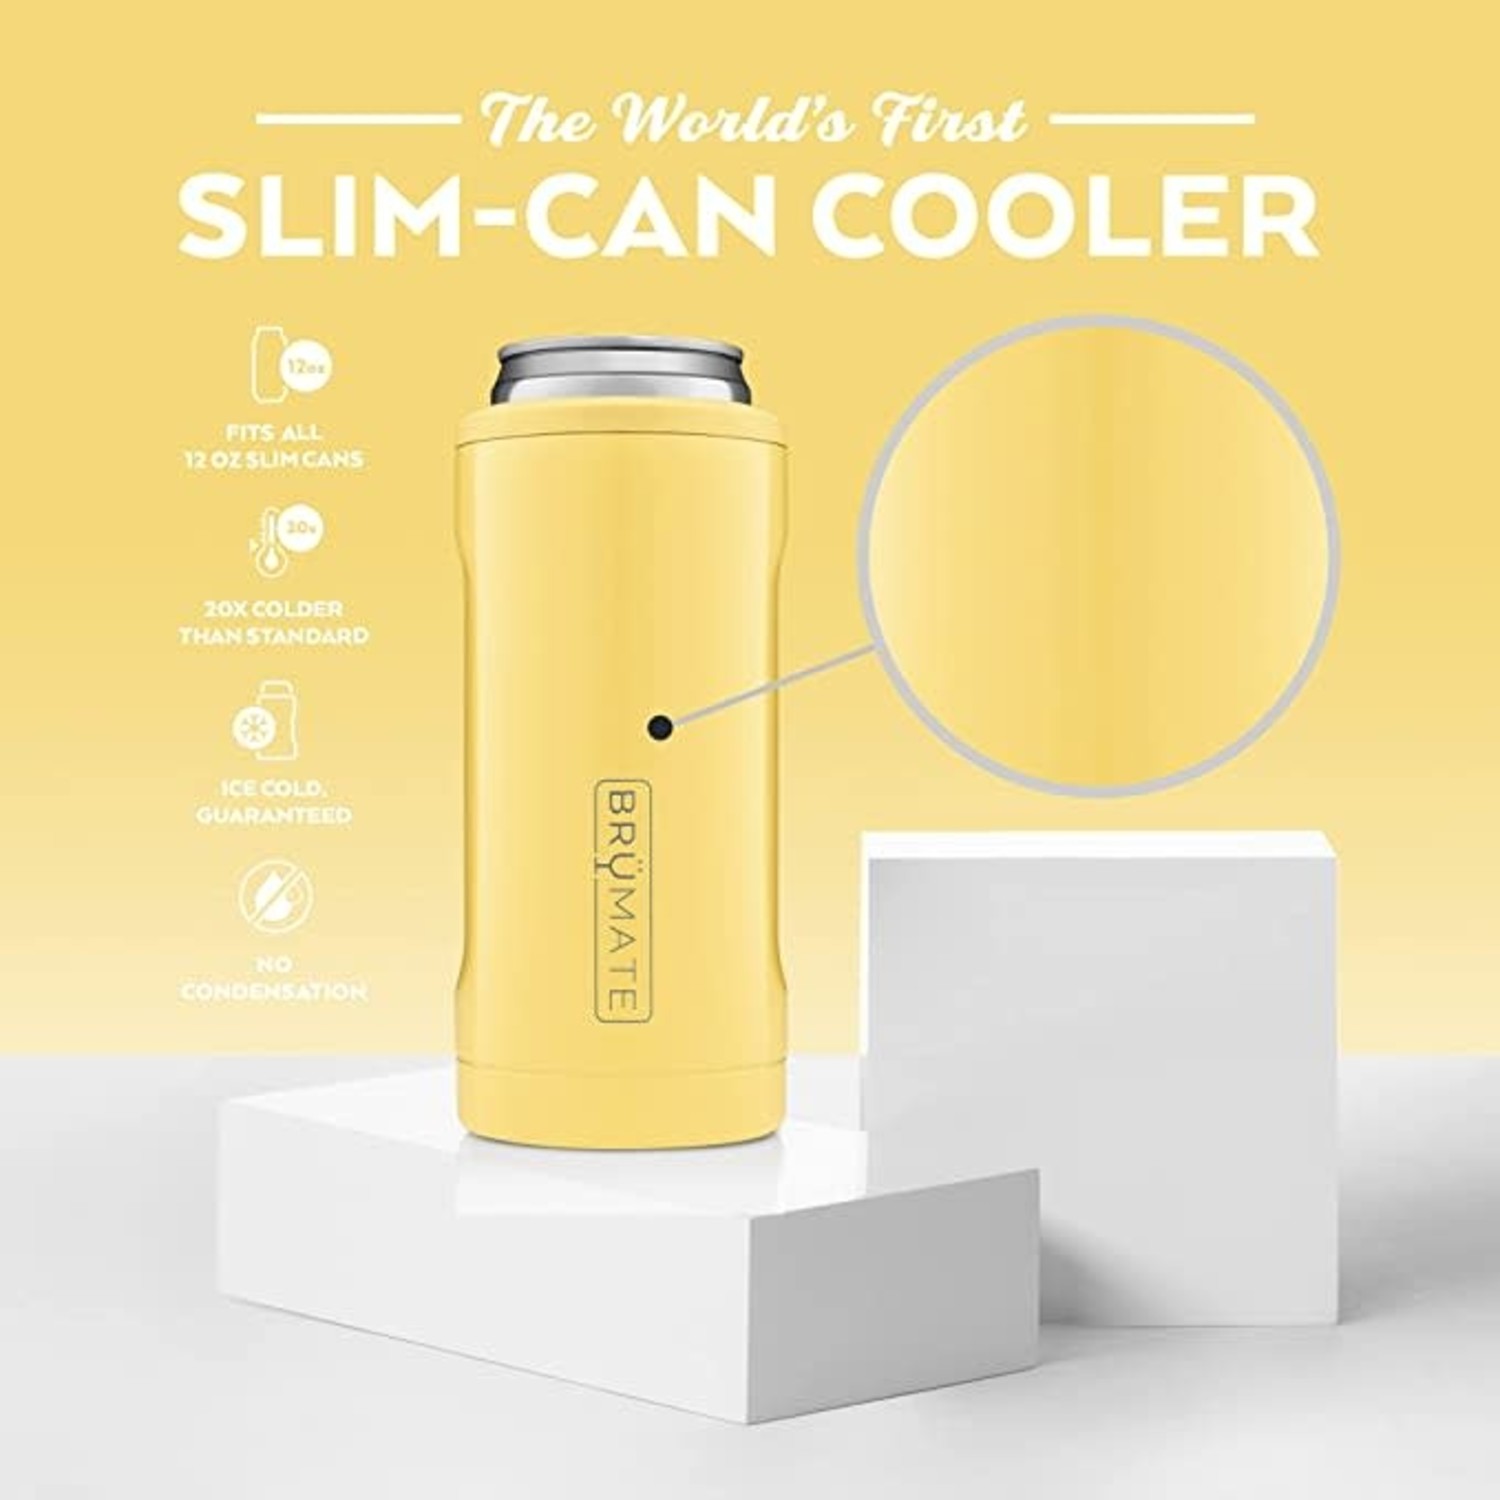 Insulated Coolers with BruMate - The Glamorous Gal